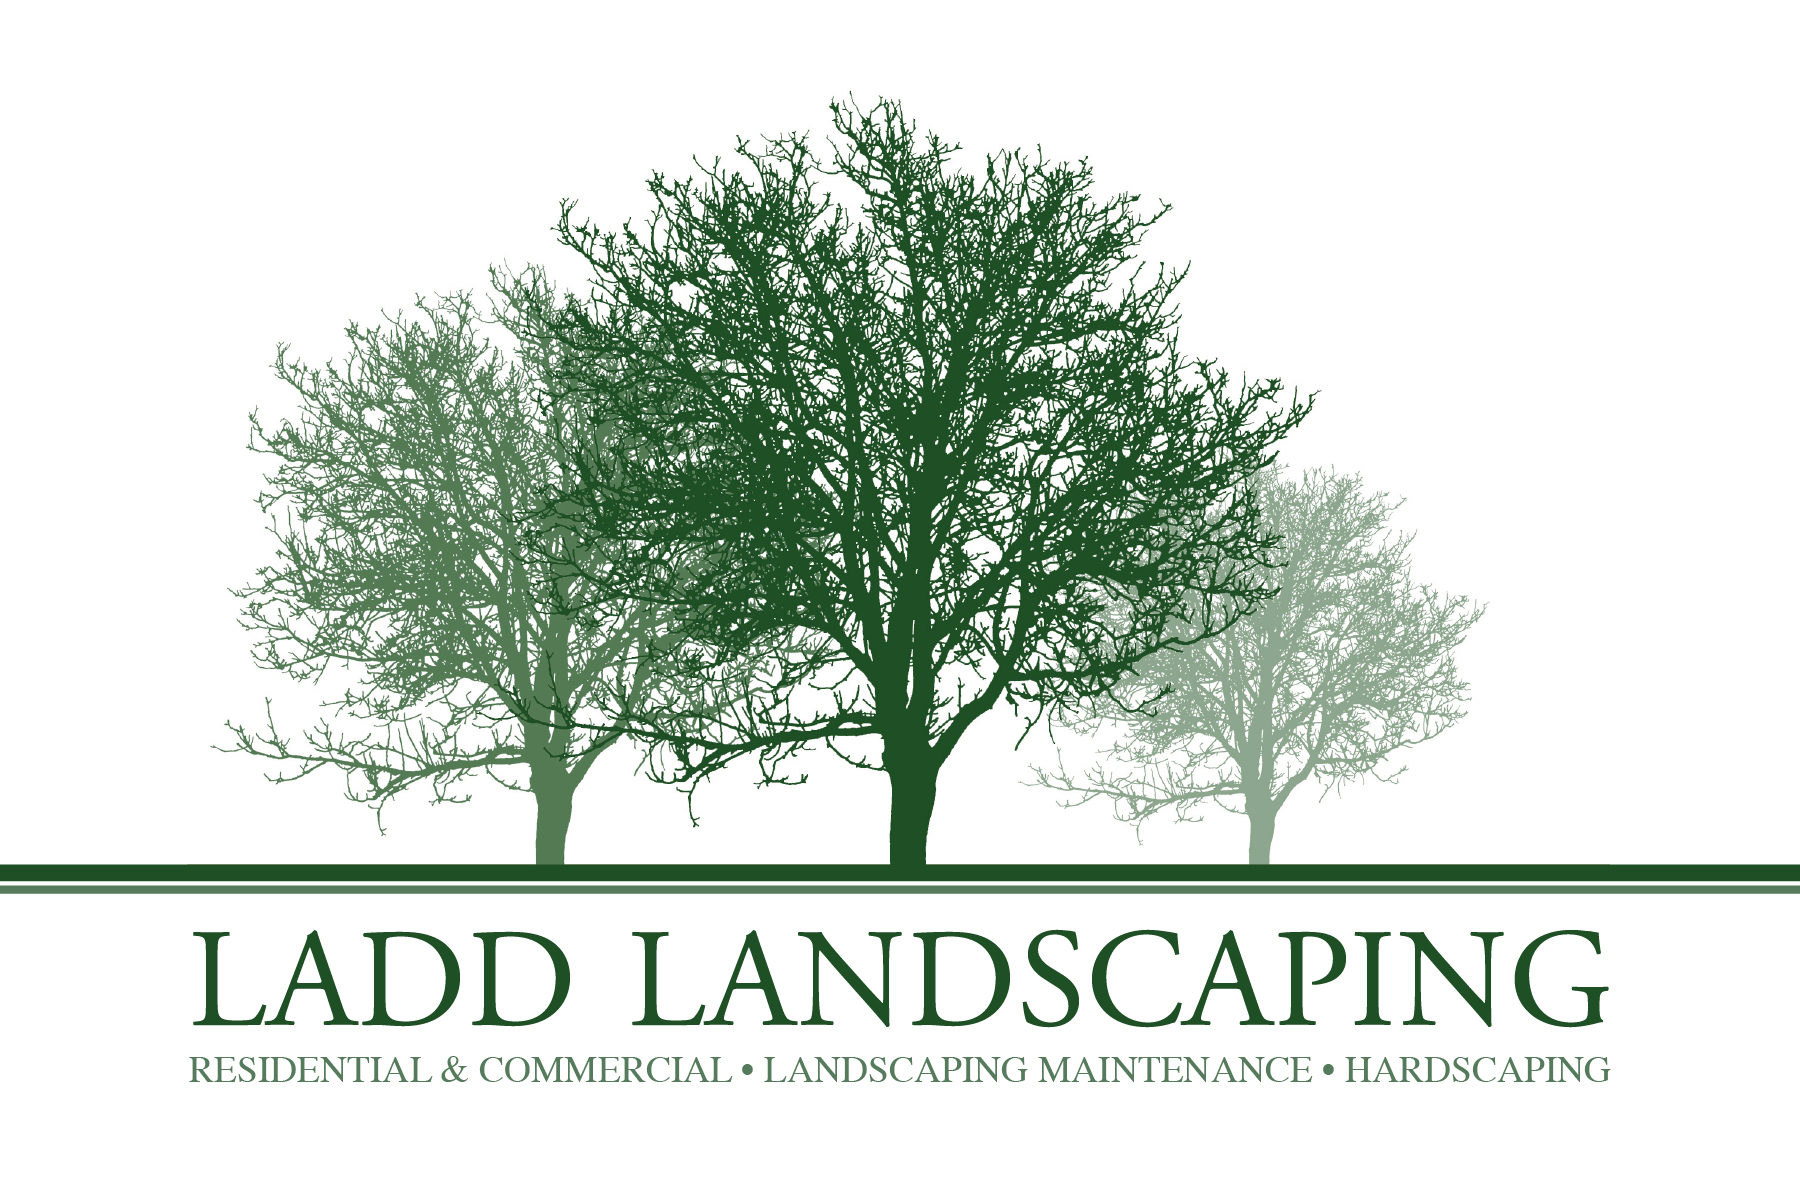 landscaping clipart for design - photo #4